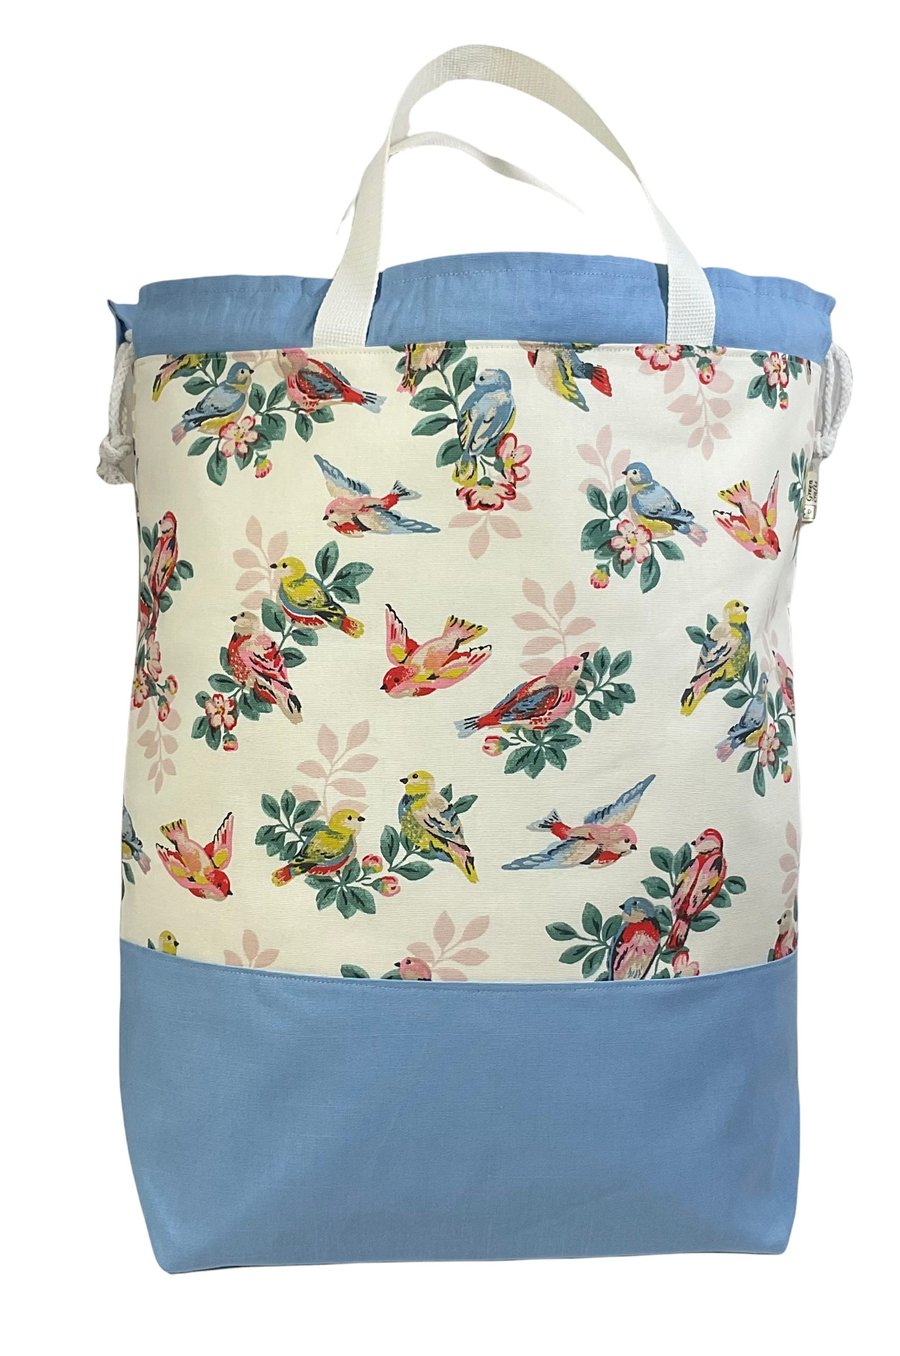 XXL drawstring knitting bag with birds and floral print, supersized multi pocket